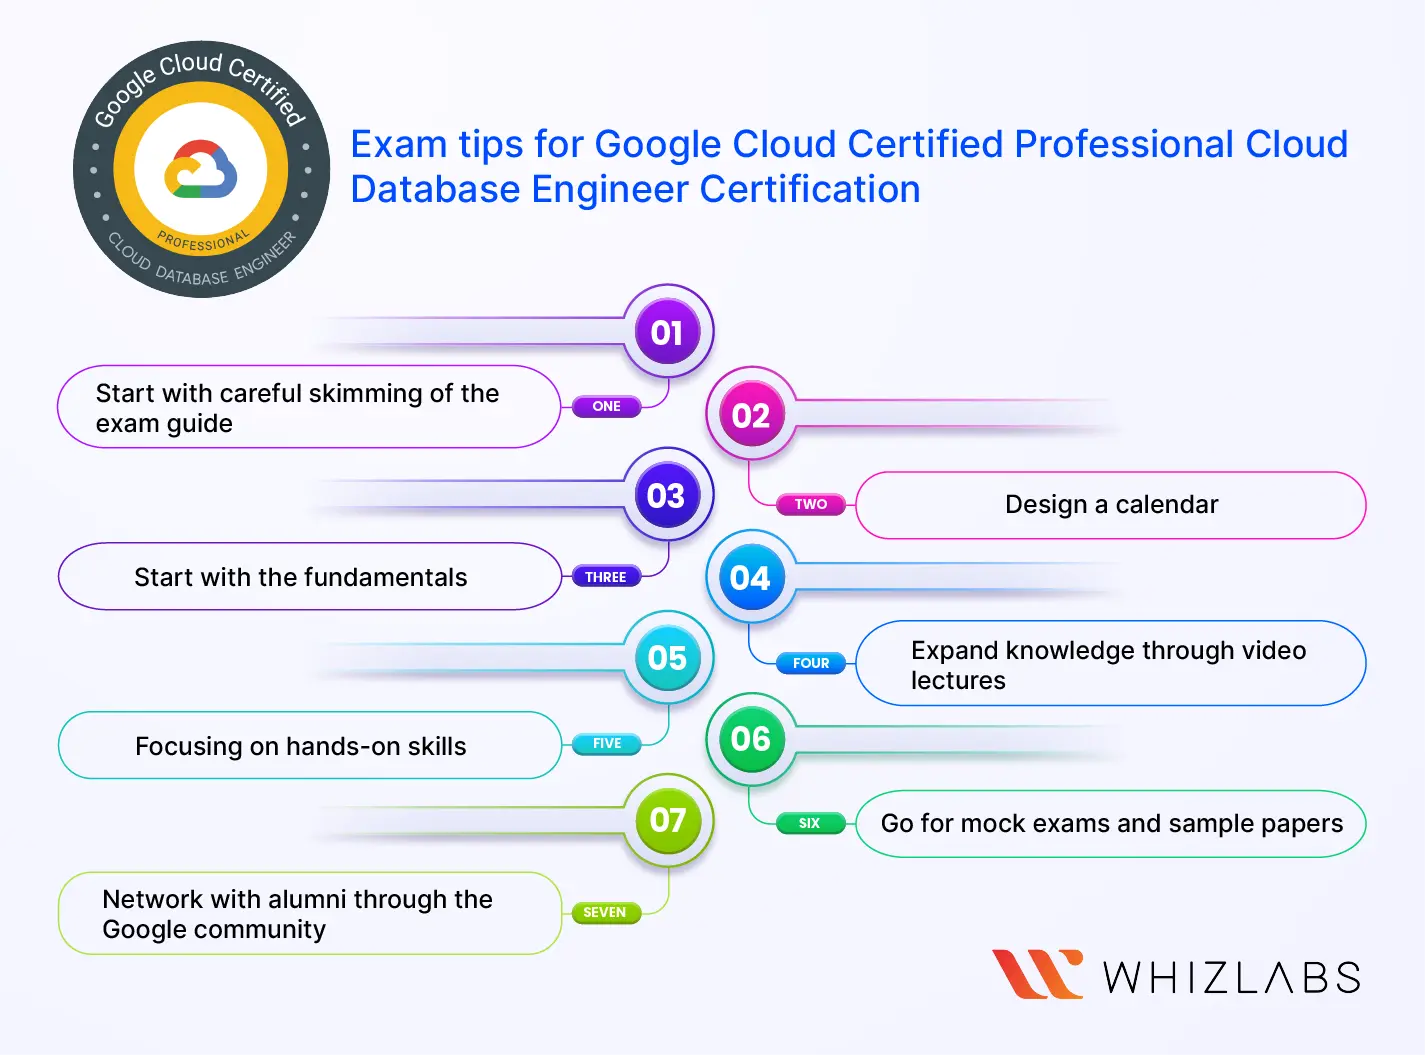 Exam-tips-for-Google-Cloud-Certified-Professional-Cloud-Database-Engineer-certification